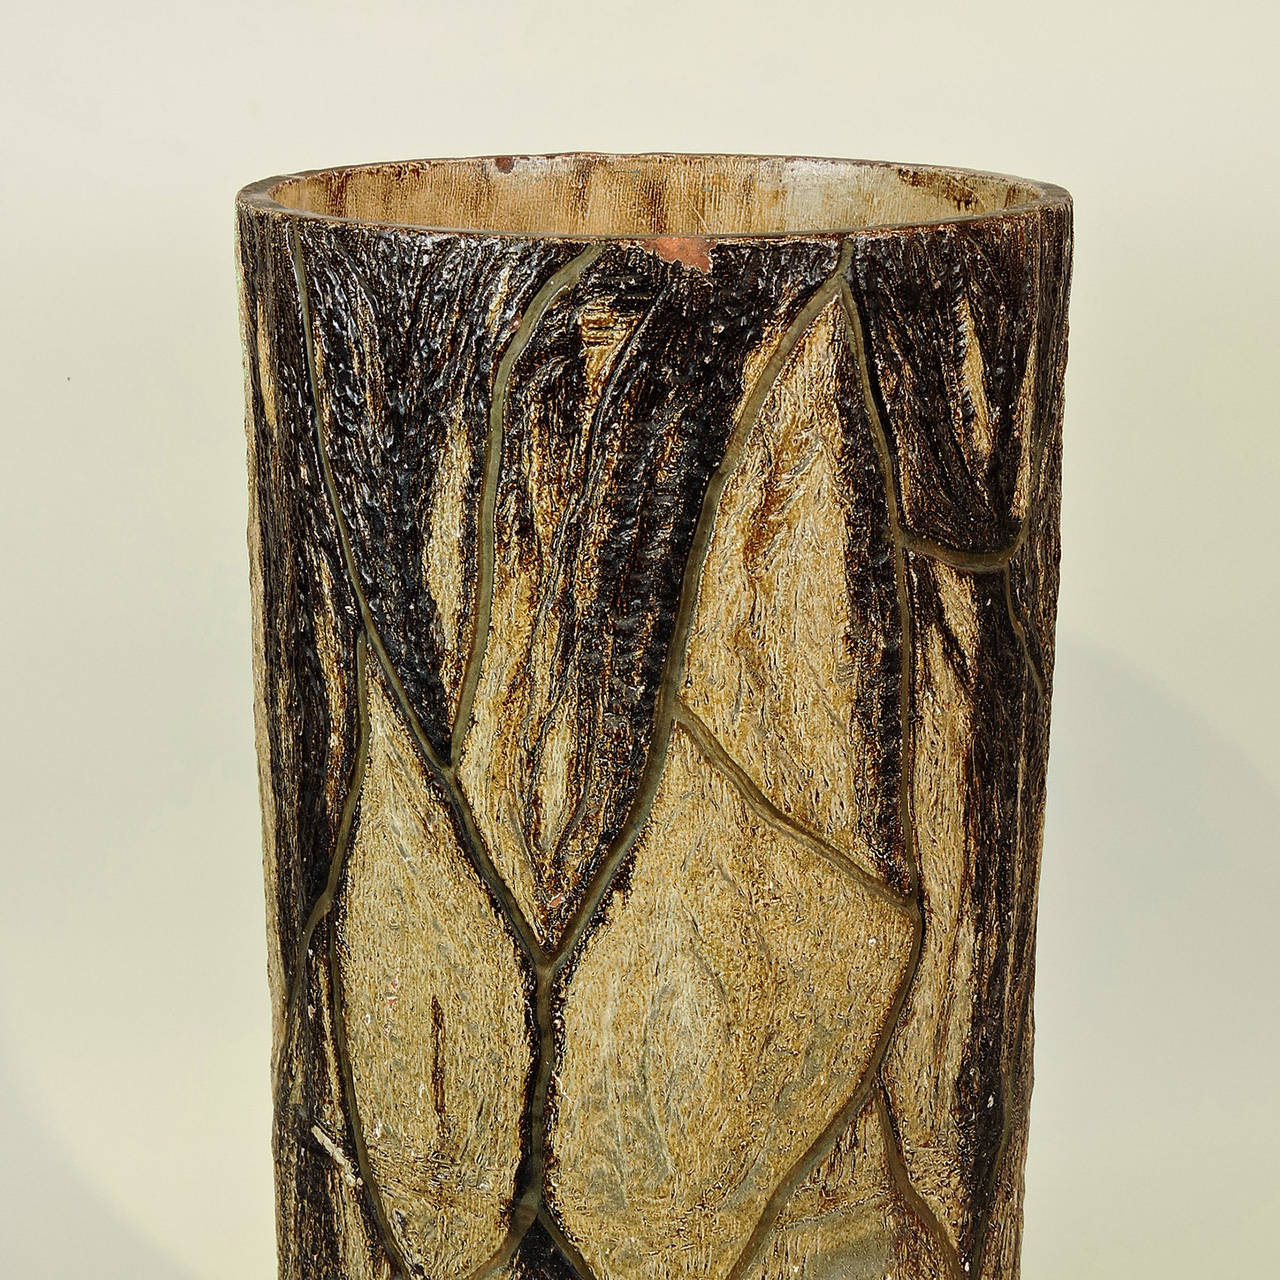 Faux bois painted terracotta umbrella stand, possibly English, late 19th century. Cylindrical form with naturally realistic modeled tree bark relief.
Measures: Height: 20 1/4 inches, diameter: 9 inches.